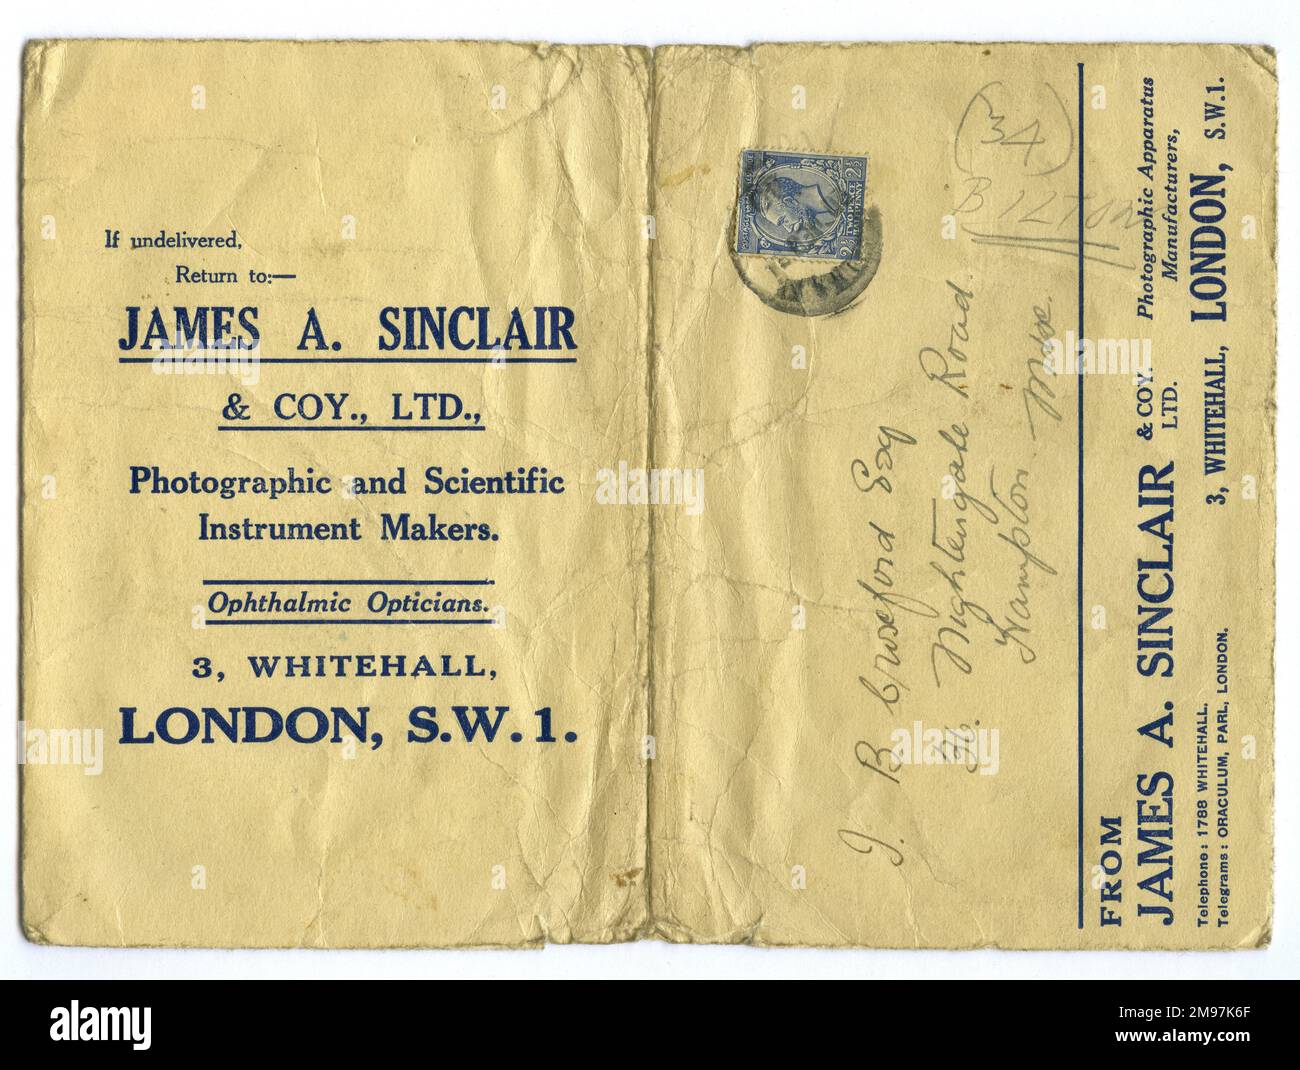 Photographic film wallet from James A Sinclair, Whitehall, London. Sent by post, it is stamped and addressed to the customer, J B Croxford of Nightingale Road, Hampton, Middlesex. Stock Photo